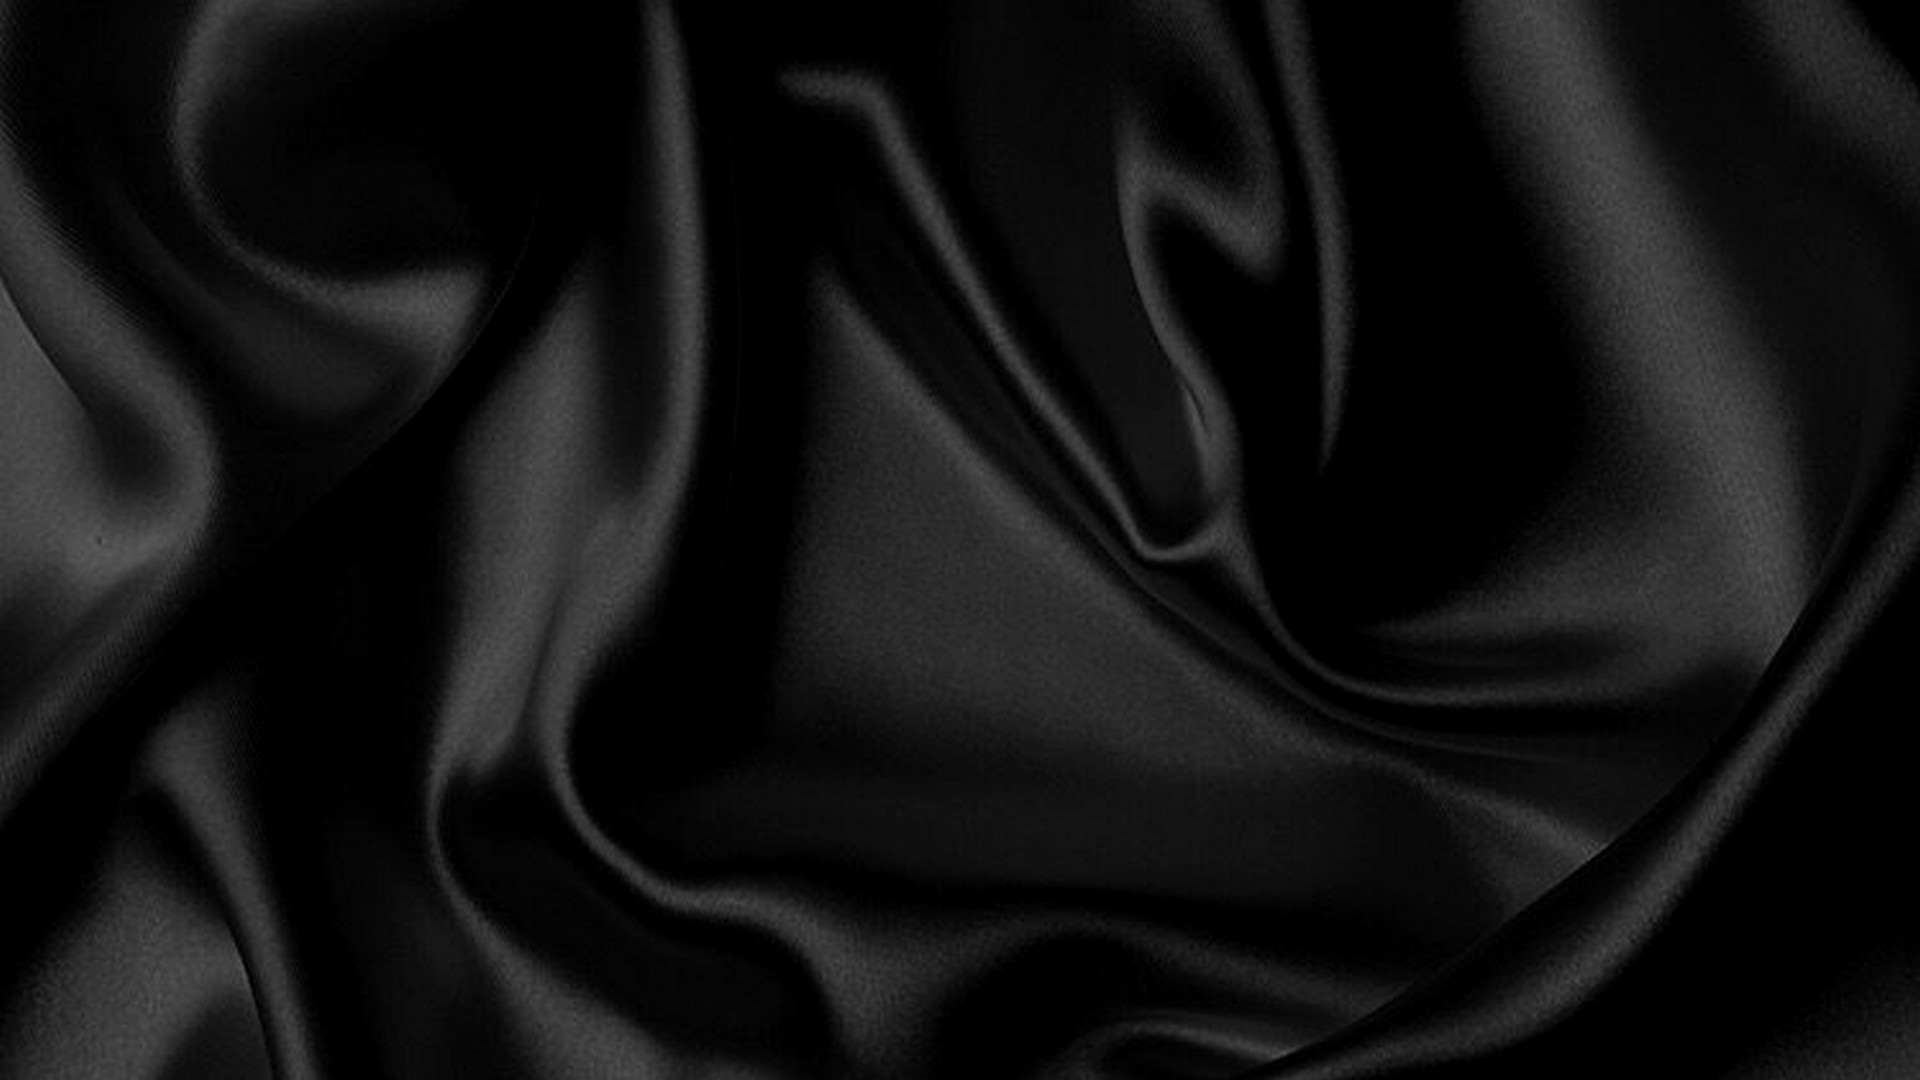 Black Silk iPhone 7 Wallpaper with high-resolution 1920x1080 pixel. You can use this wallpaper for your iPhone 5, 6, 7, 8, X, XS, XR backgrounds, Mobile Screensaver, or iPad Lock Screen